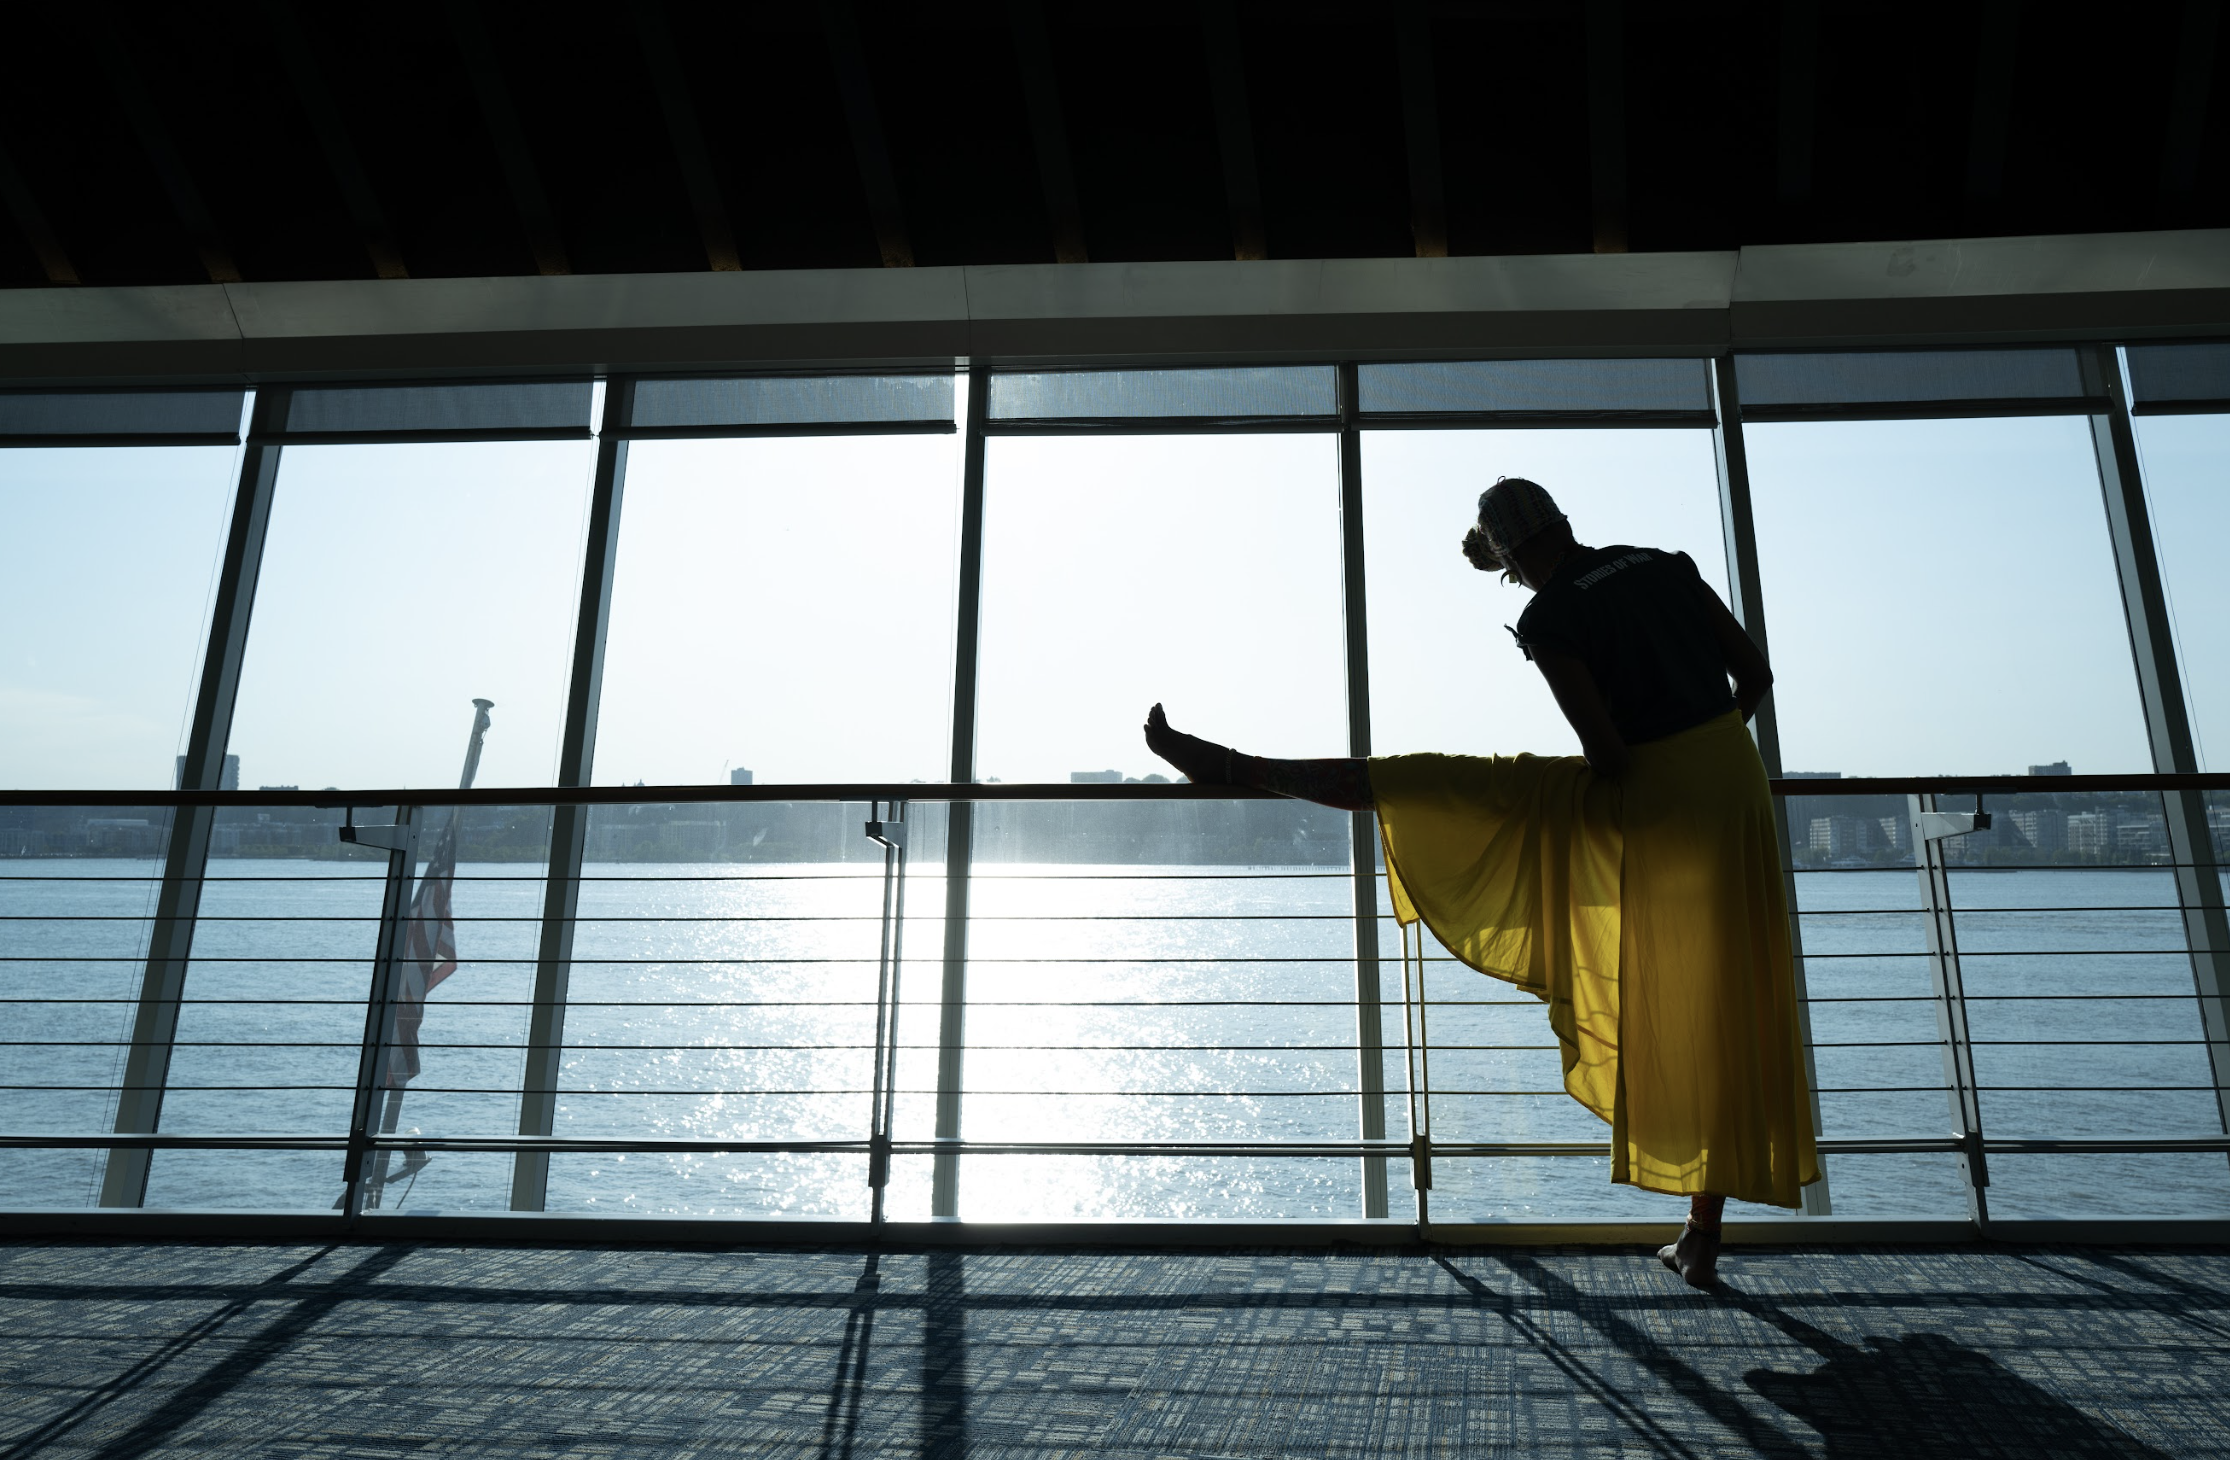 A woman stretches on a ballet bar in front of a window overlooking New York's Hudson River.